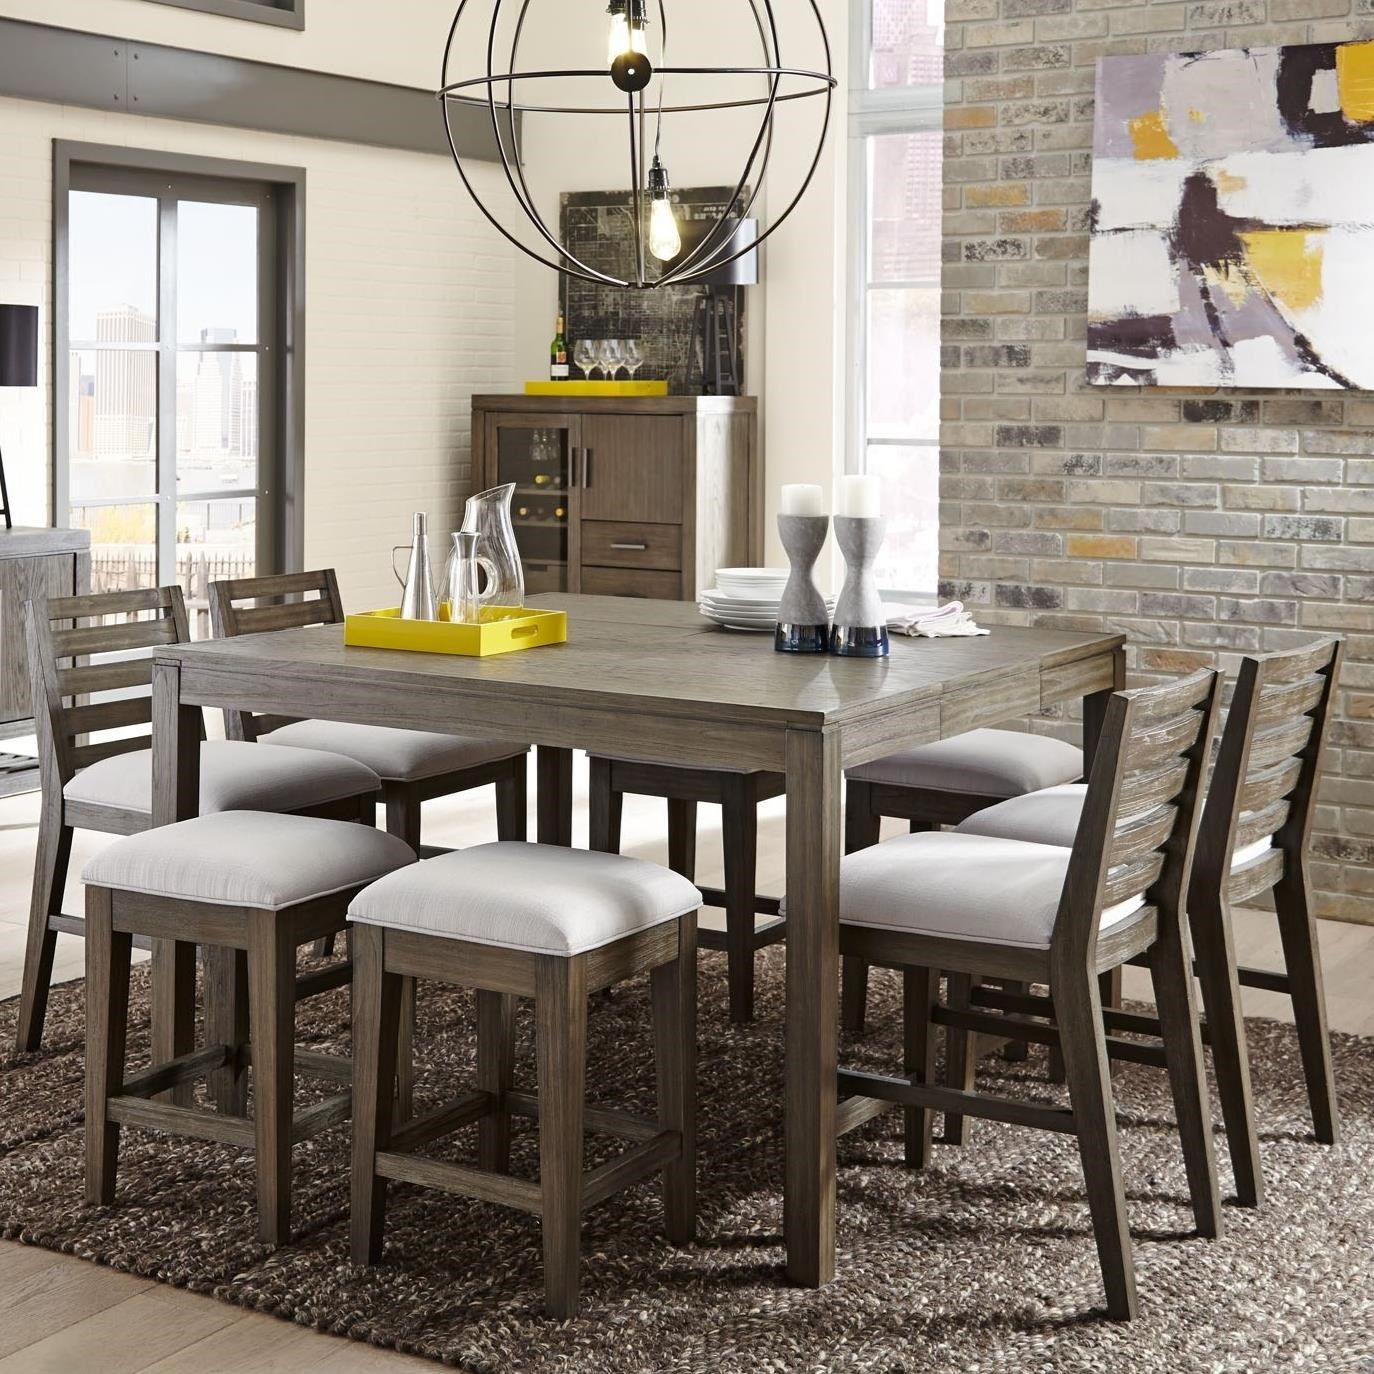 Belfort Select District 9 Piece Counter Height Dining Set | Belfort Inside 9 Piece Oval Dining Sets (View 12 of 15)